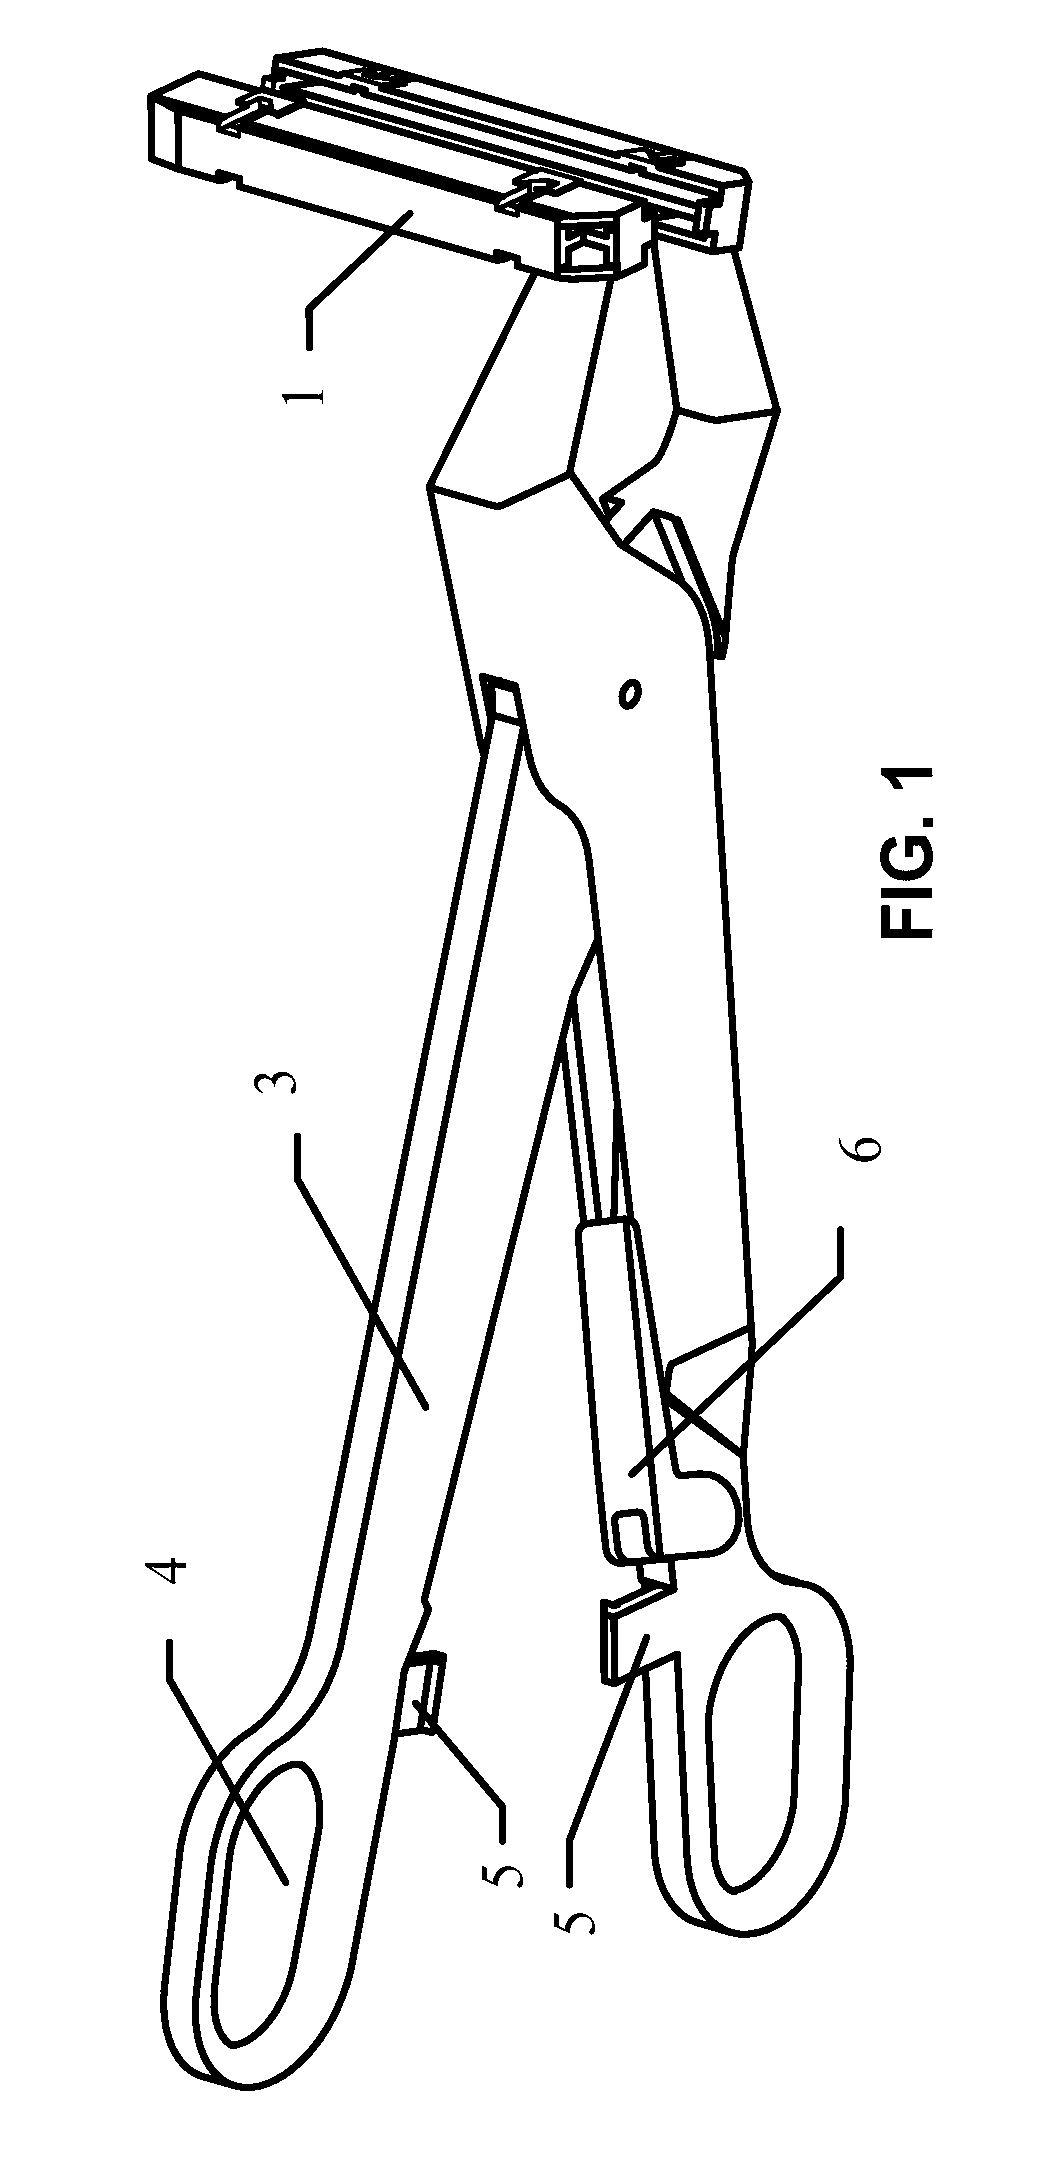 Surgical purse-string suturing instrument